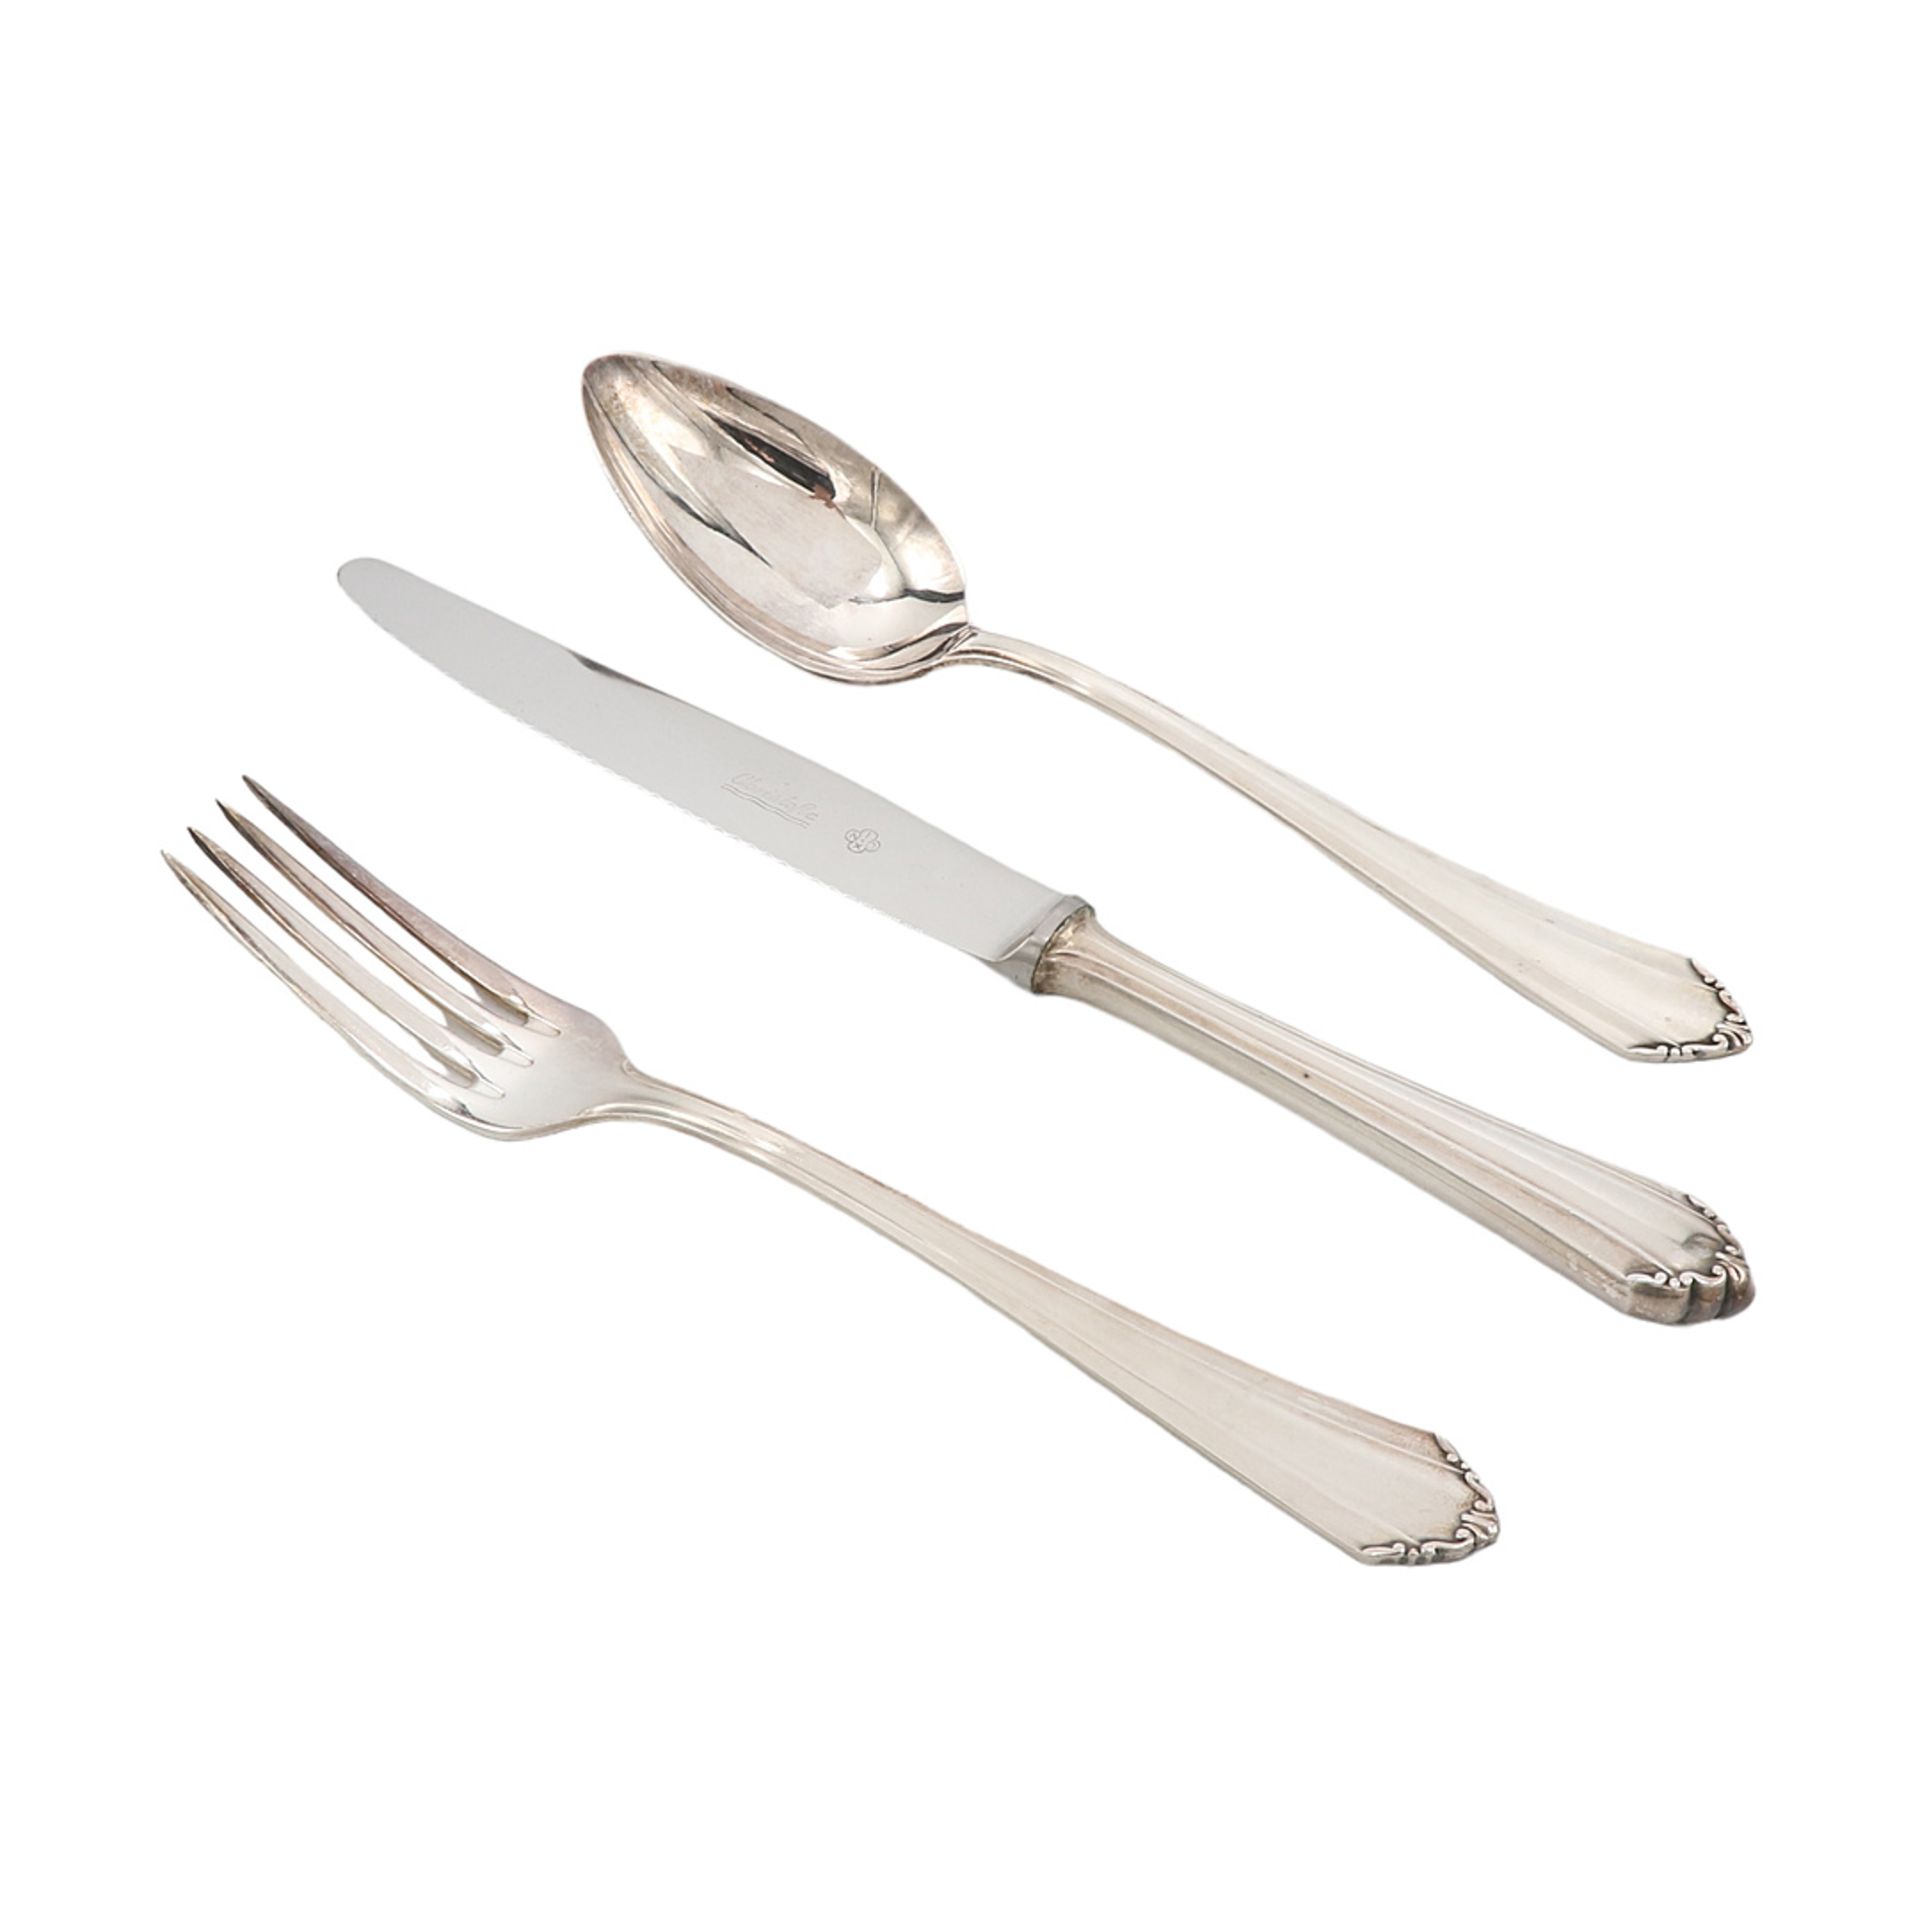 Christofle cutlery for six people, France, around 1940 - Image 2 of 3